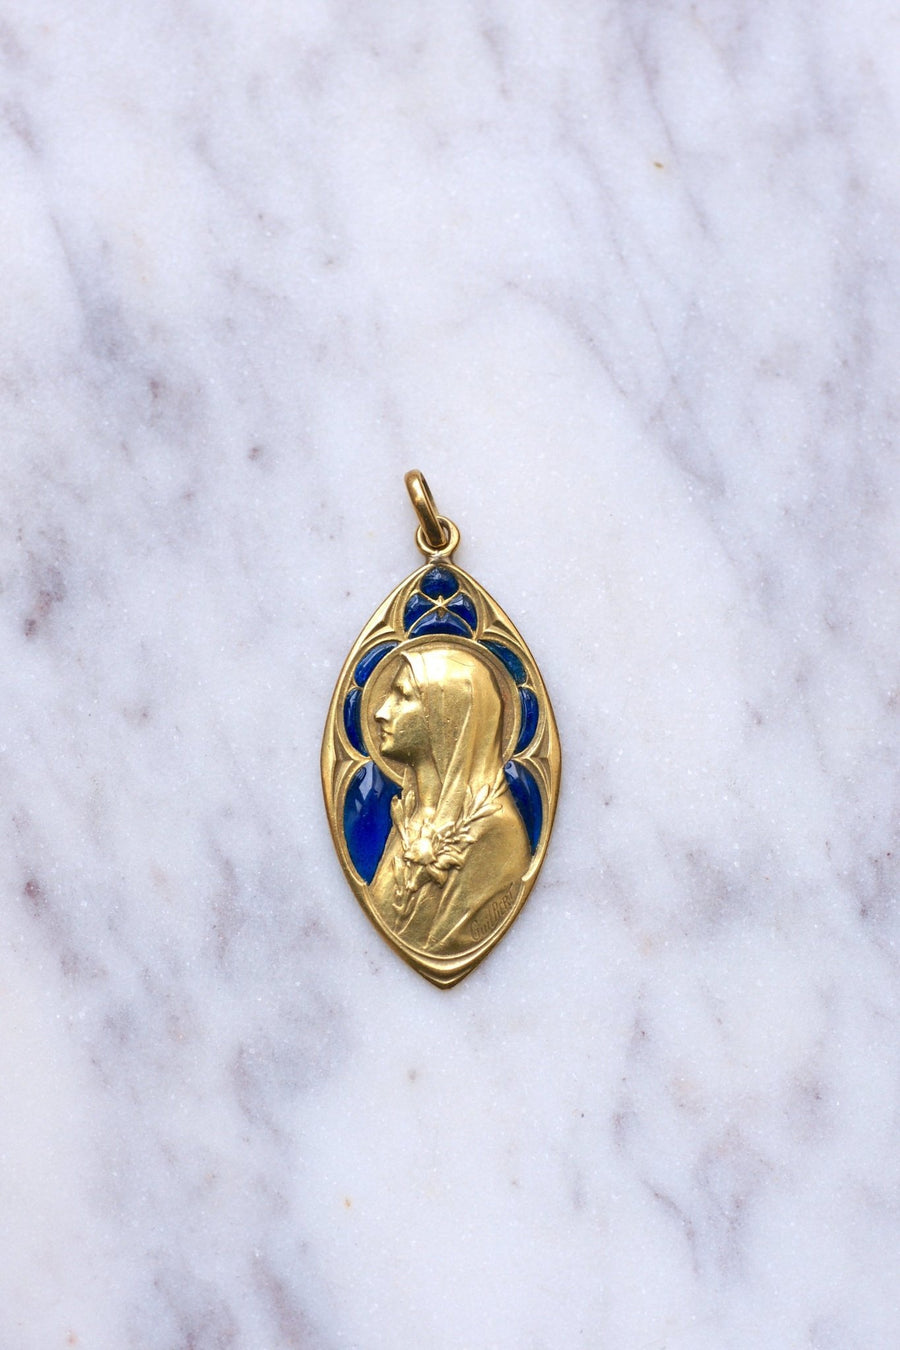 Antique medal in gold, Virgin Mary and enamel - Galerie Pénélope